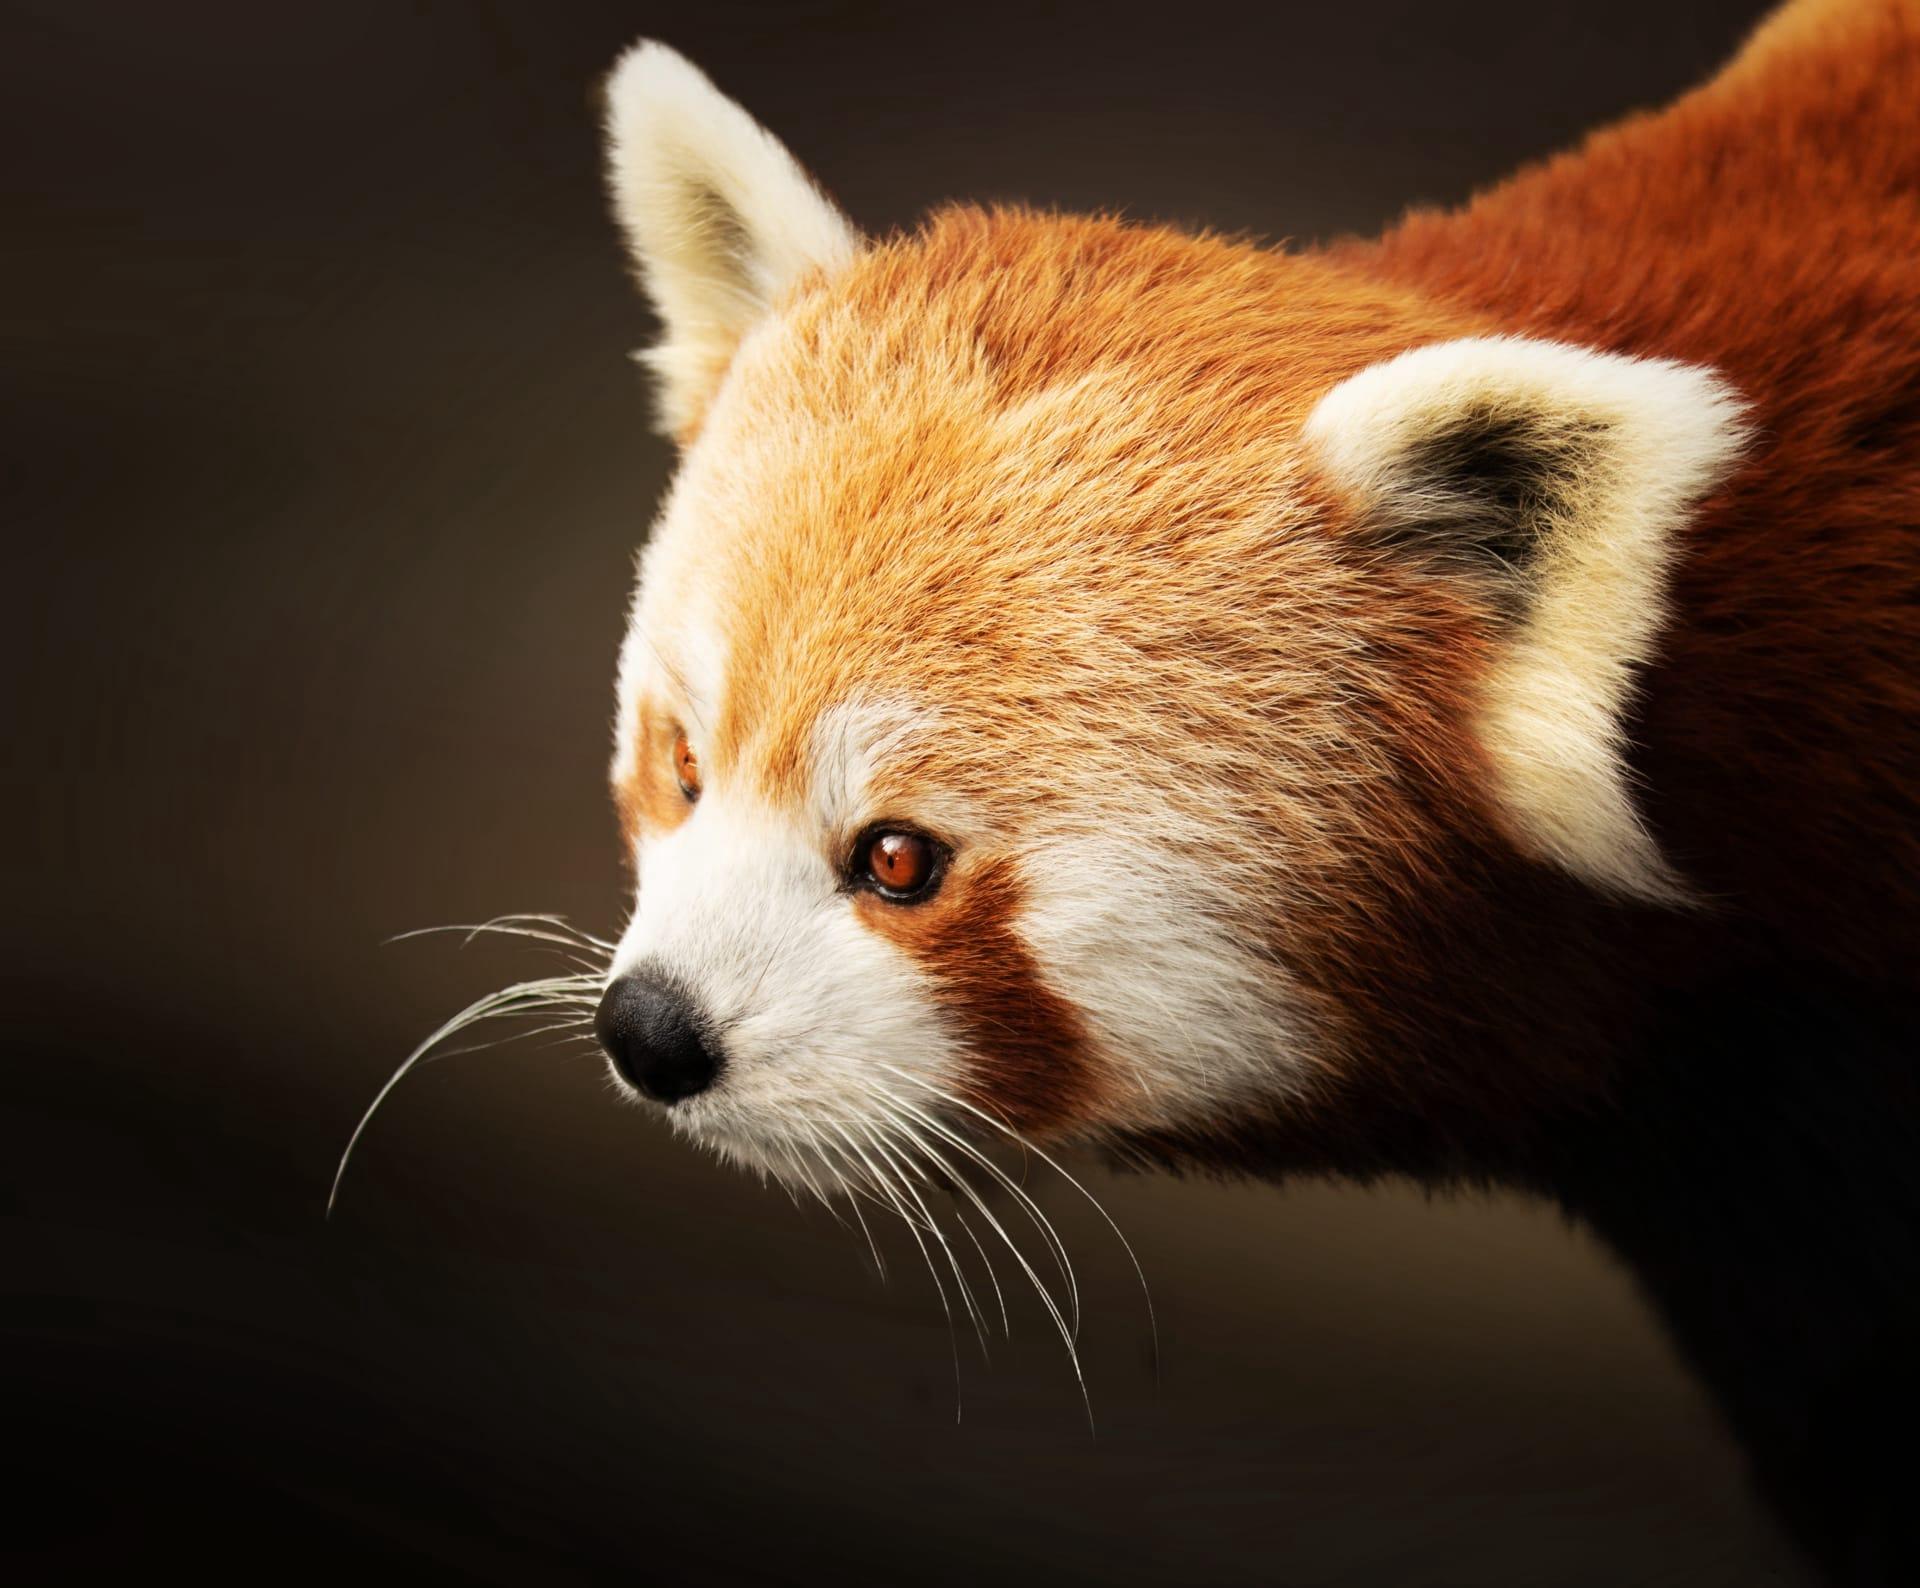 Red panda pictures